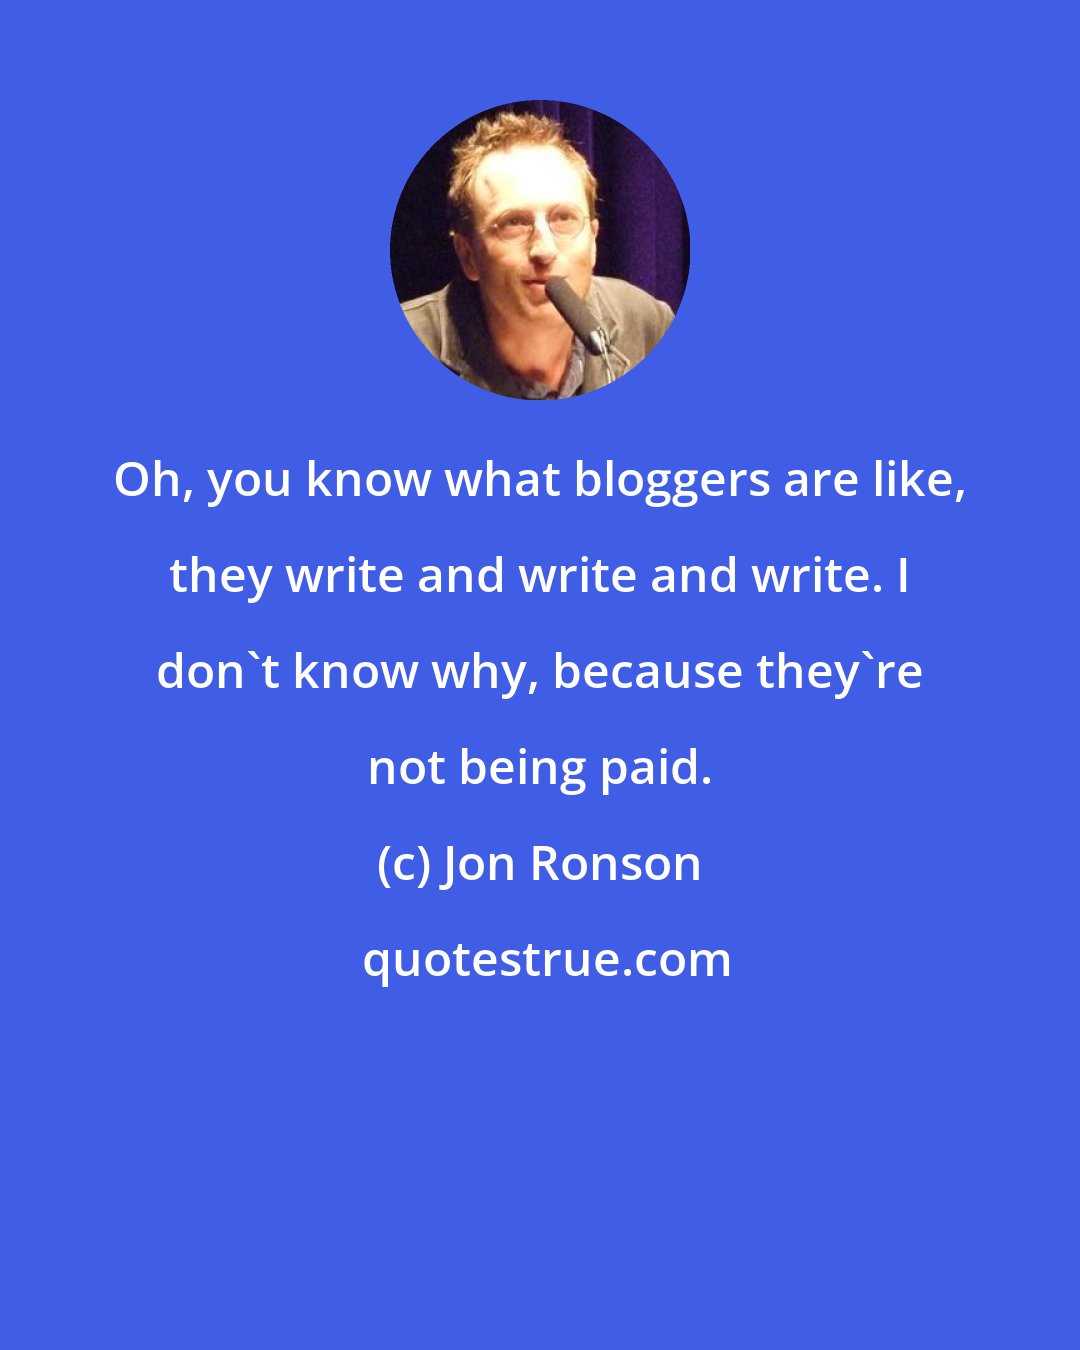 Jon Ronson: Oh, you know what bloggers are like, they write and write and write. I don't know why, because they're not being paid.